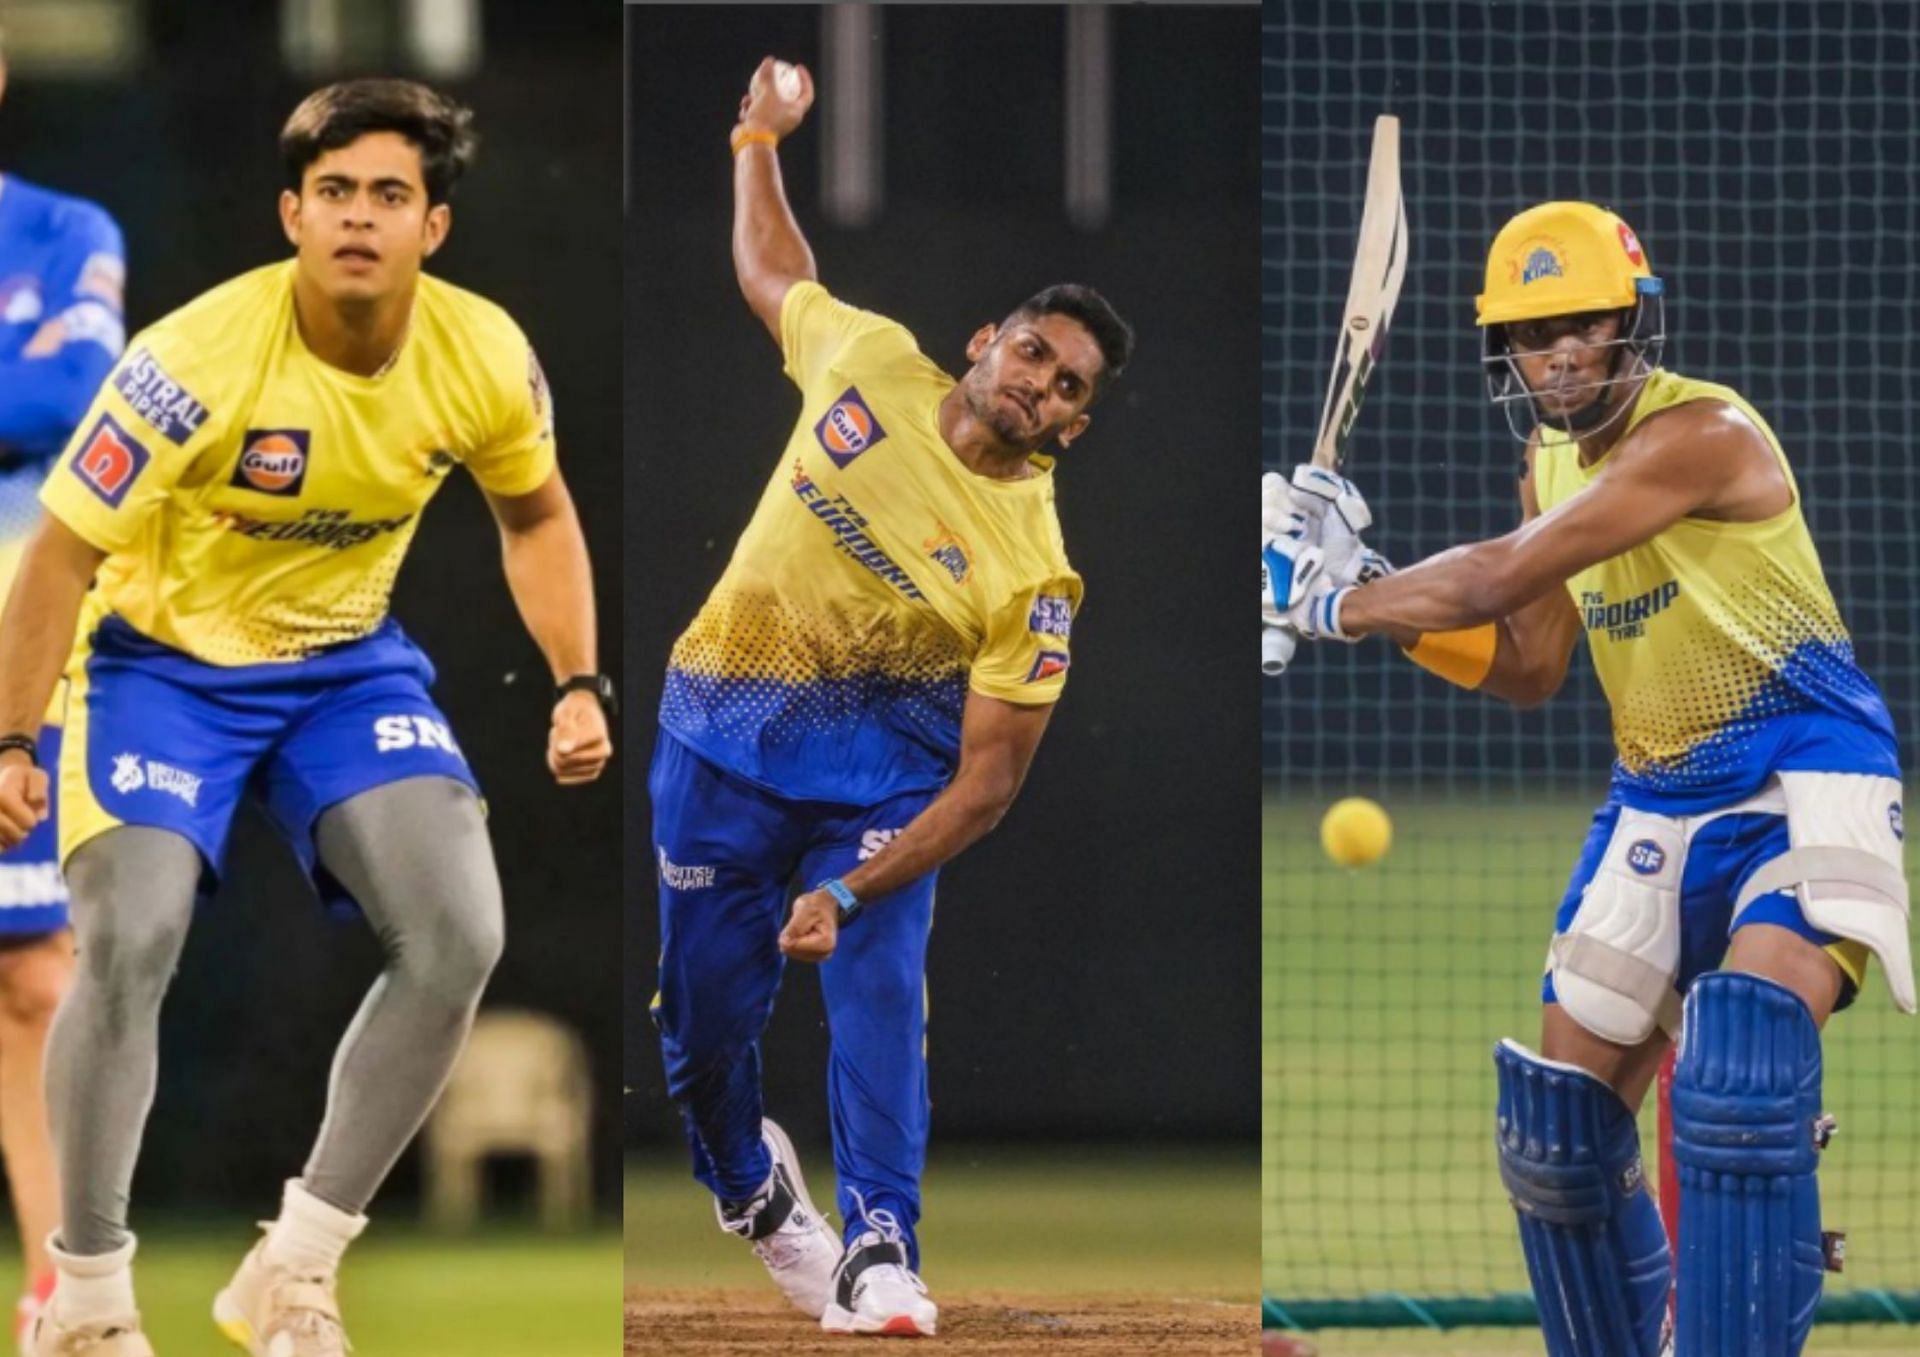 CSK have some exciting young uncapped players in their ranks for IPL 2022 (Picture Credits: Screengrab via Instagram/ Prashant Solanki, Tushar Deshpande, Chennai Super Kings).